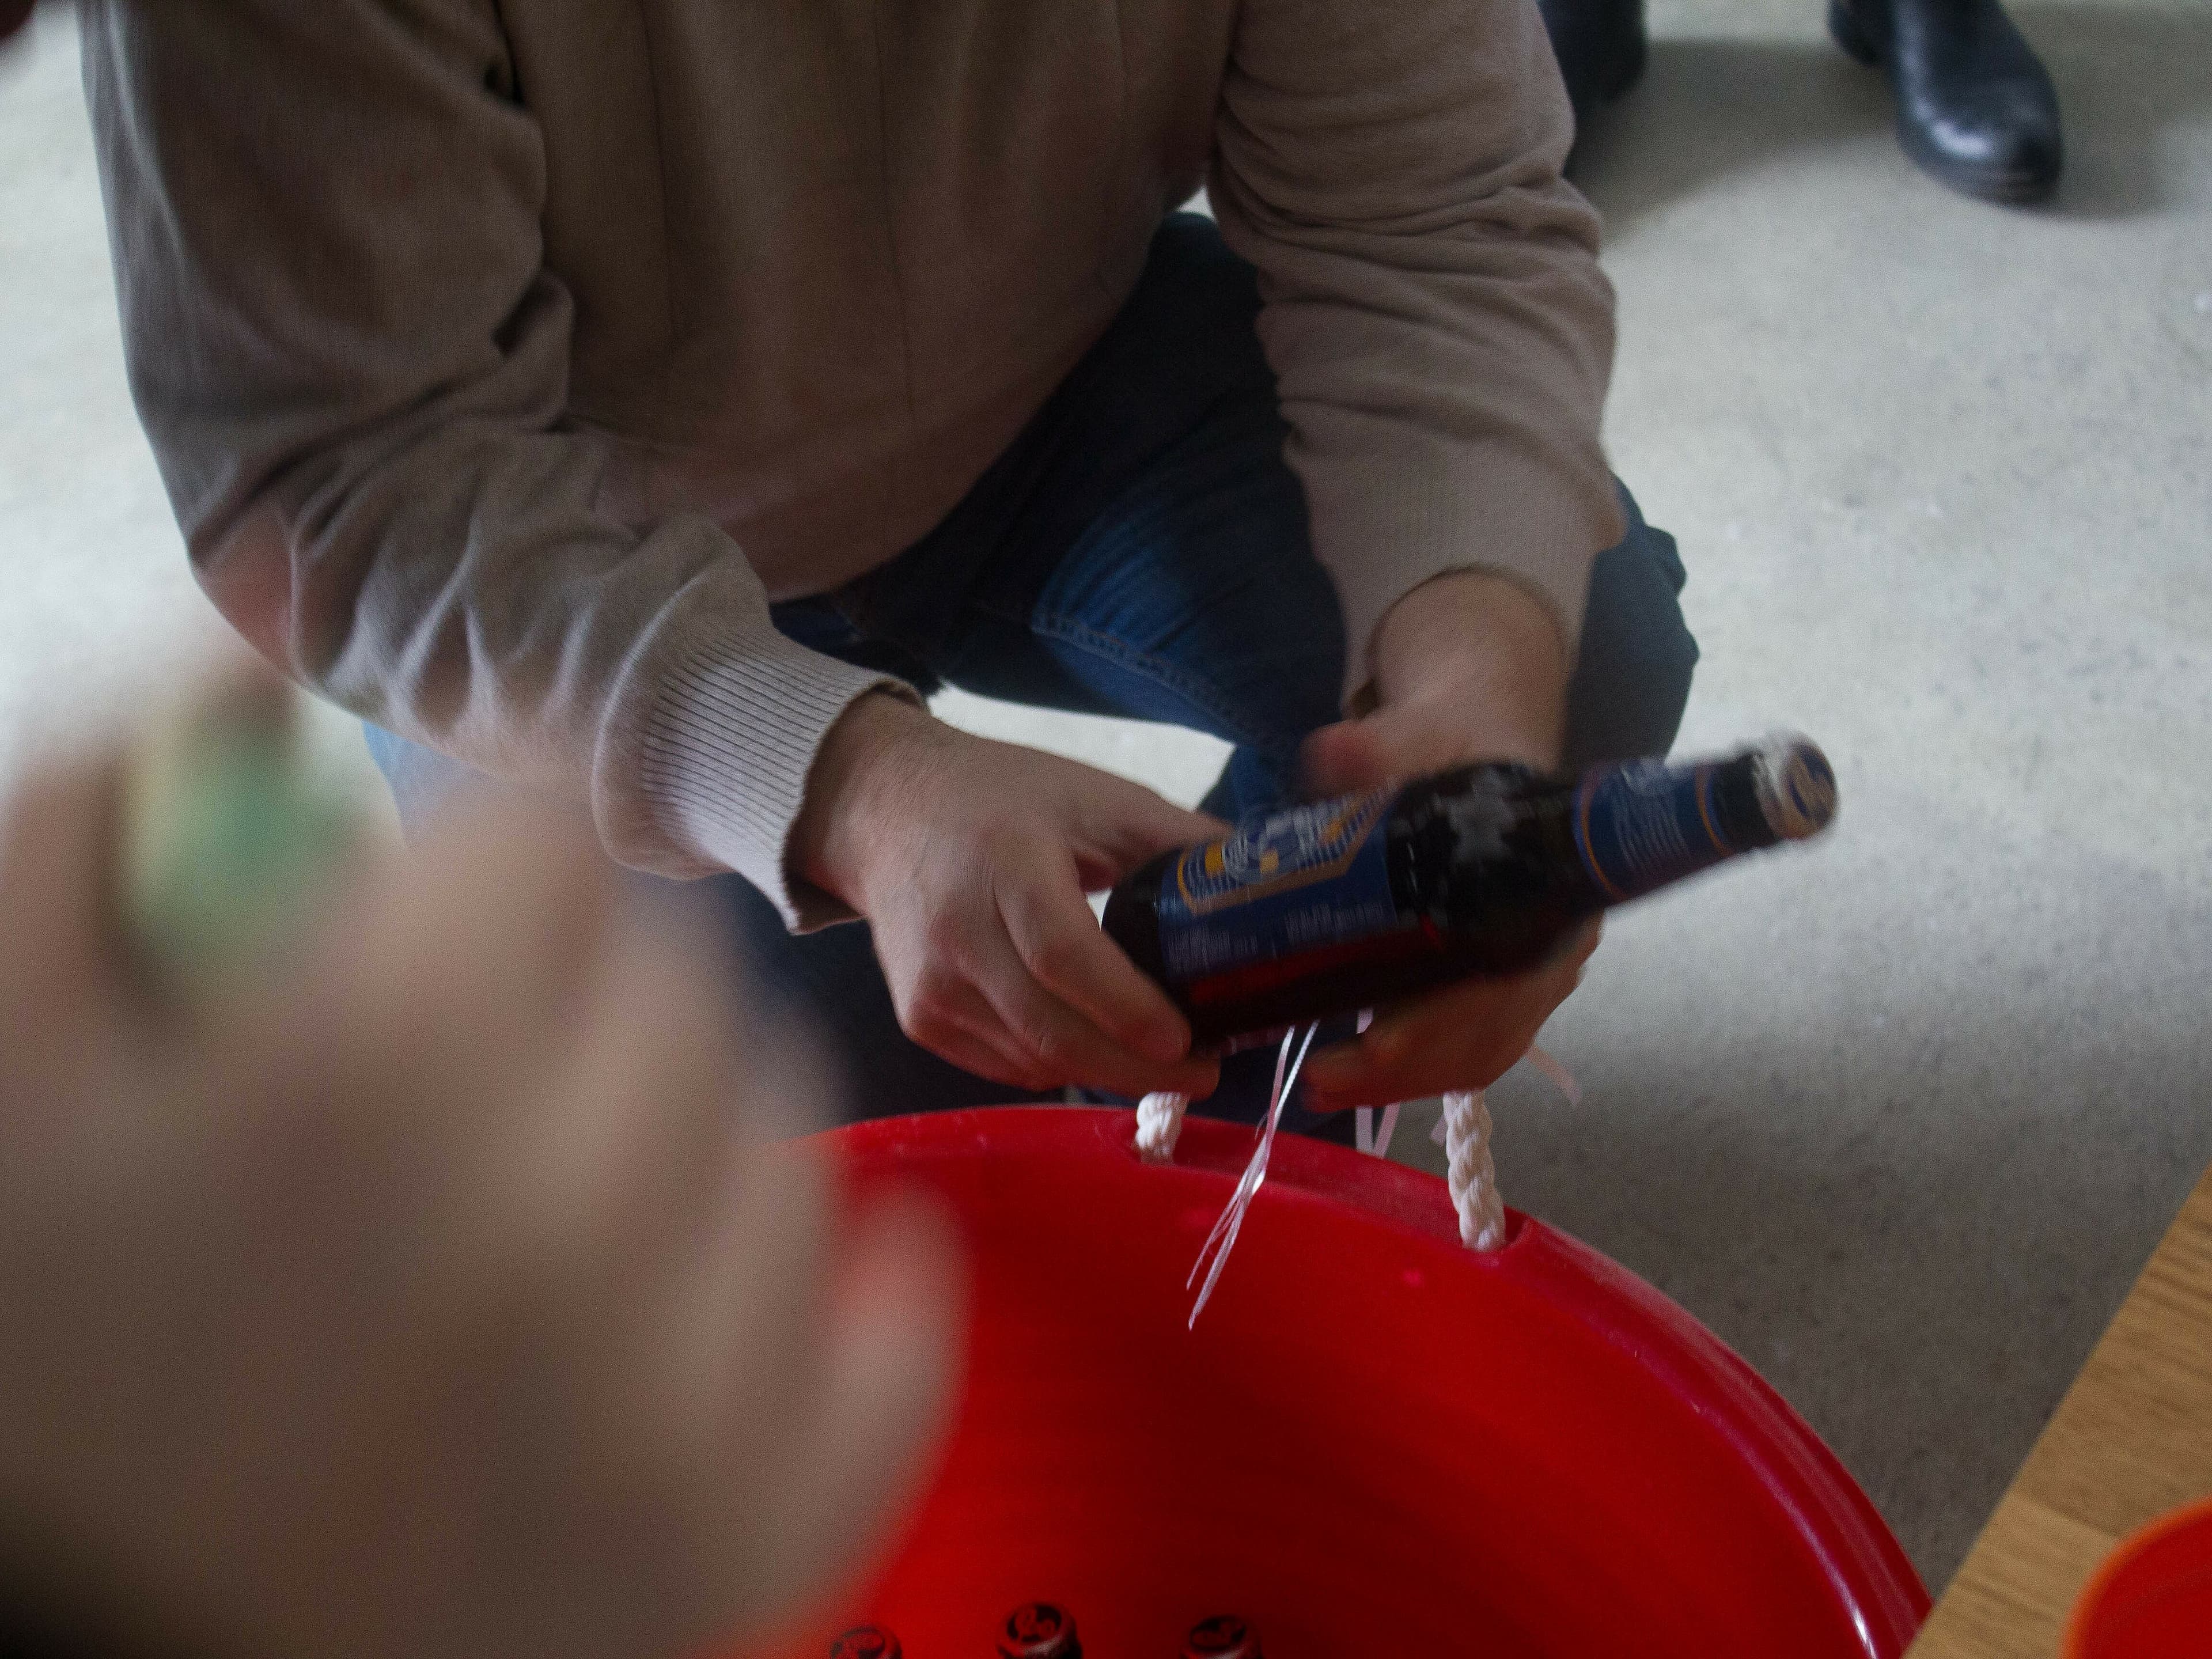 A person in a light-colored sweater and jeans crouches beside a large red bucket, holding a dark-colored bottle with a label. Another person is partially visible in the foreground, reaching towards the bucket. The scene appears to be indoors.